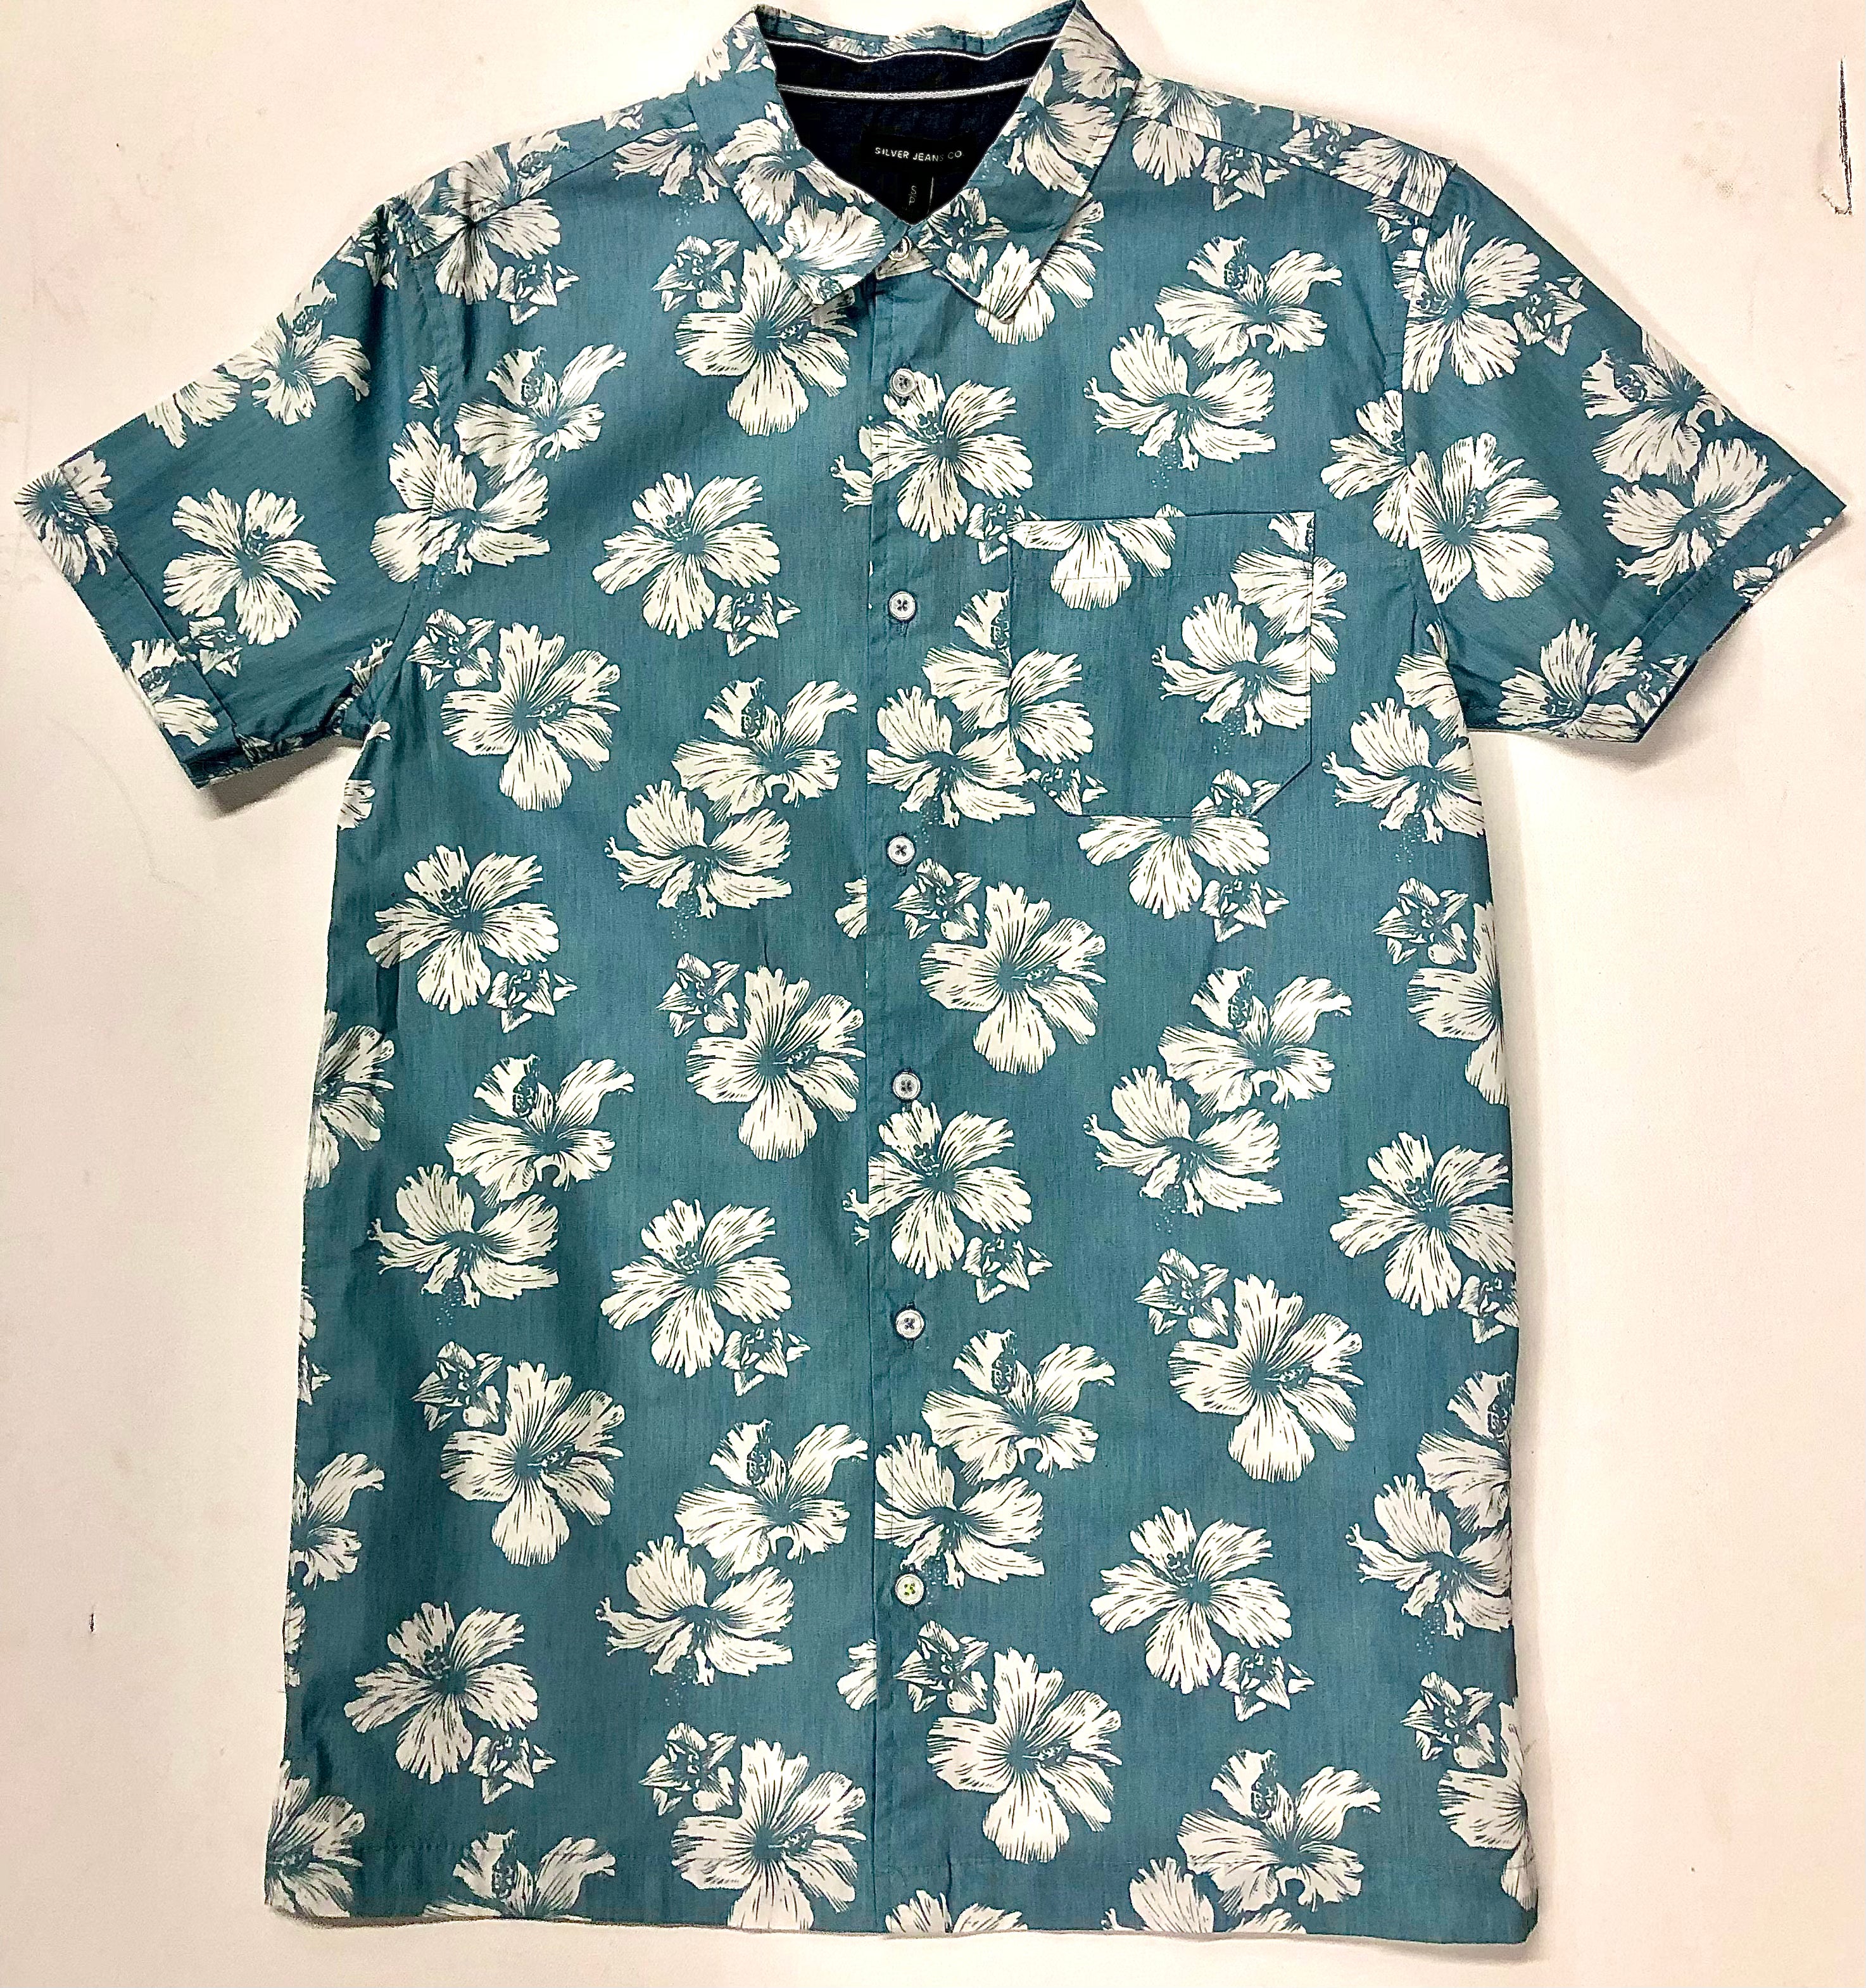 SILVER JEANS Mens' Floral Short Sleeve